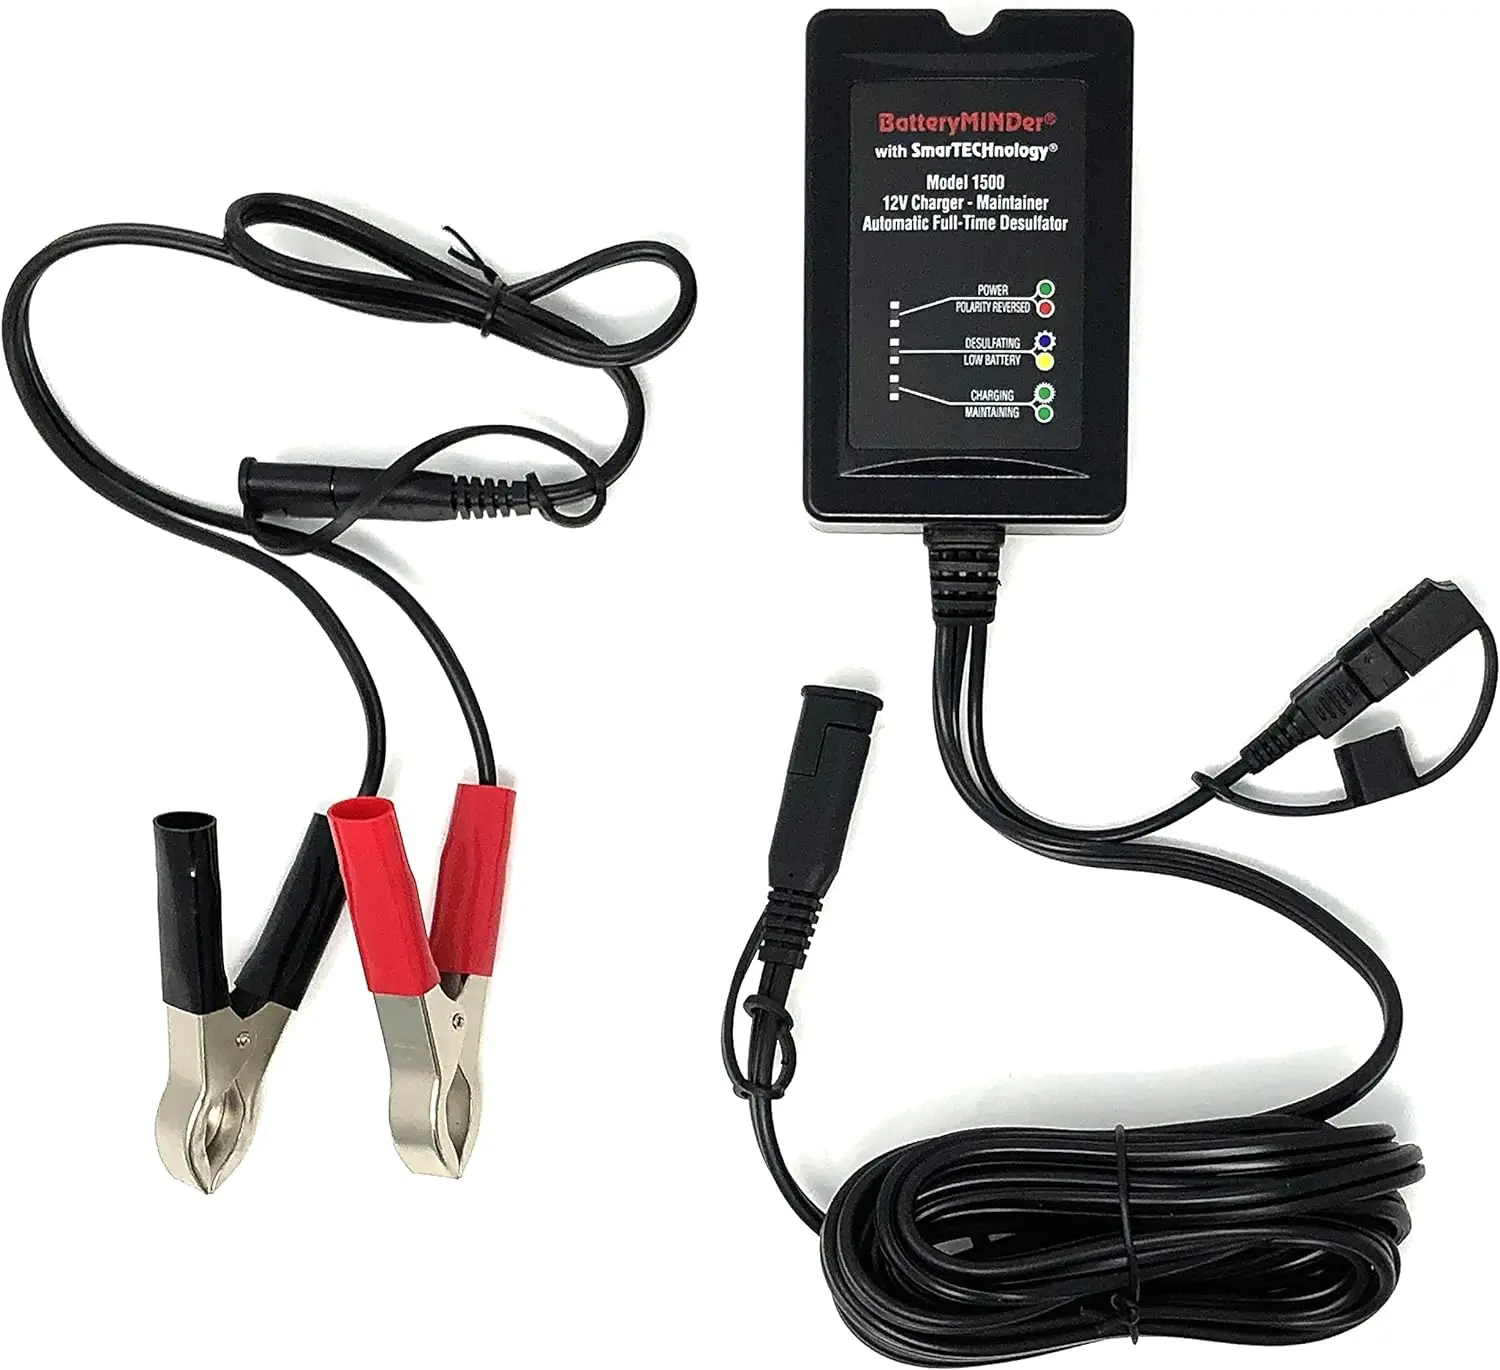 

12 Volt-1.5 AMP Charger, Maintainer, and Desulfator with SmartTECHnology - Designed for Cars, Trucks, Boats, Motorcycles, Sno